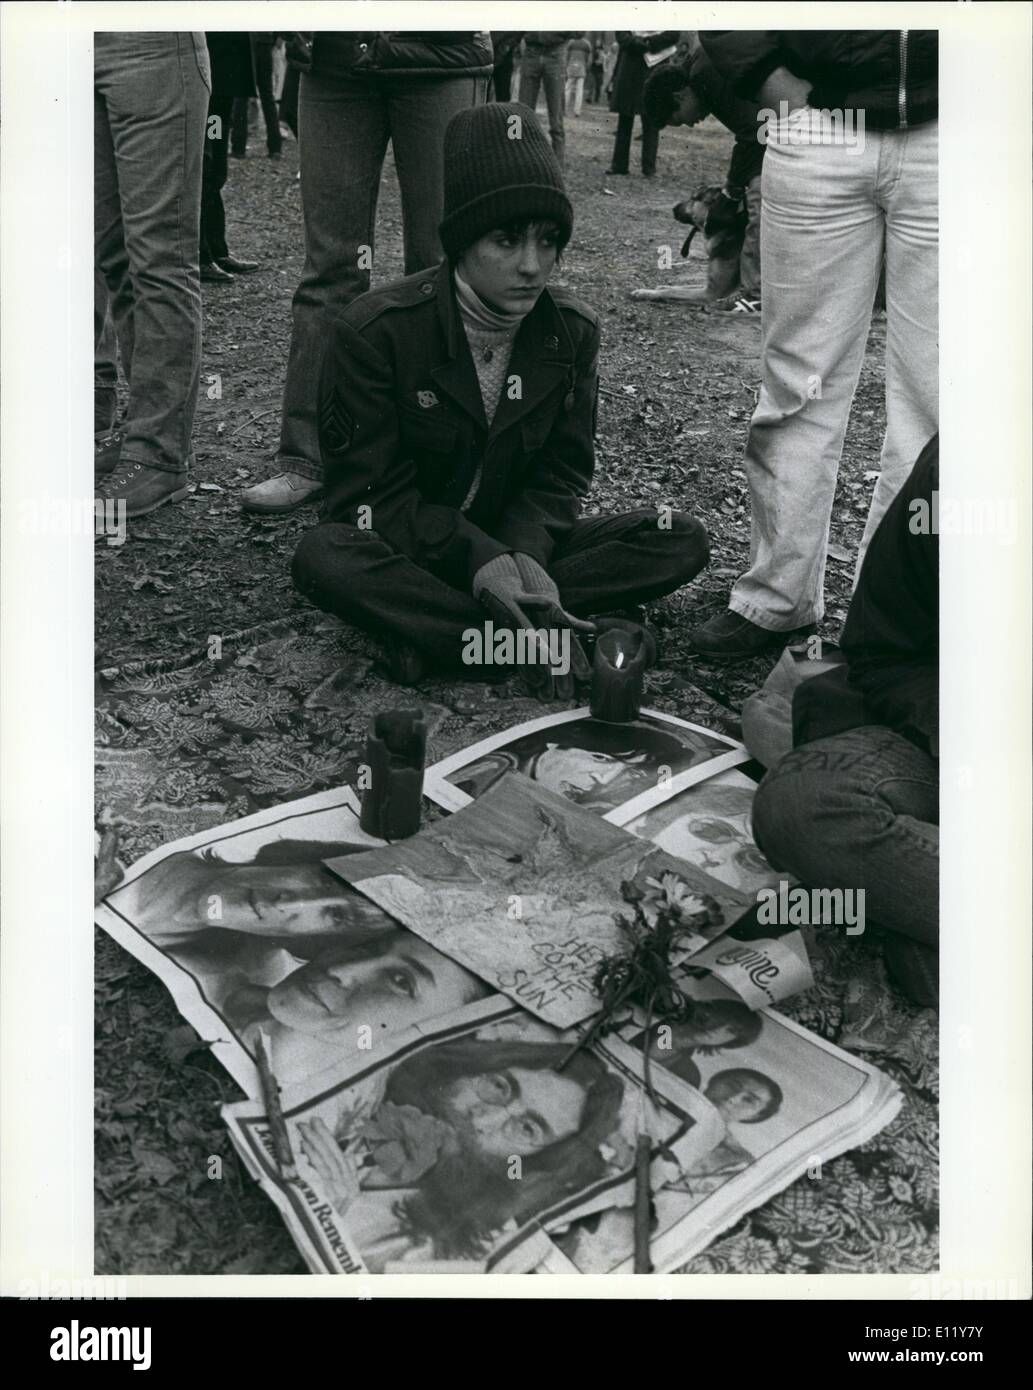 Dec. 12, 1980 - Central park, New york: Tens of thousands gathered in central park today for a ten minute silent vigil for slain Beatle, John Lennon. Photo shows Mourners in central park Stock Photo